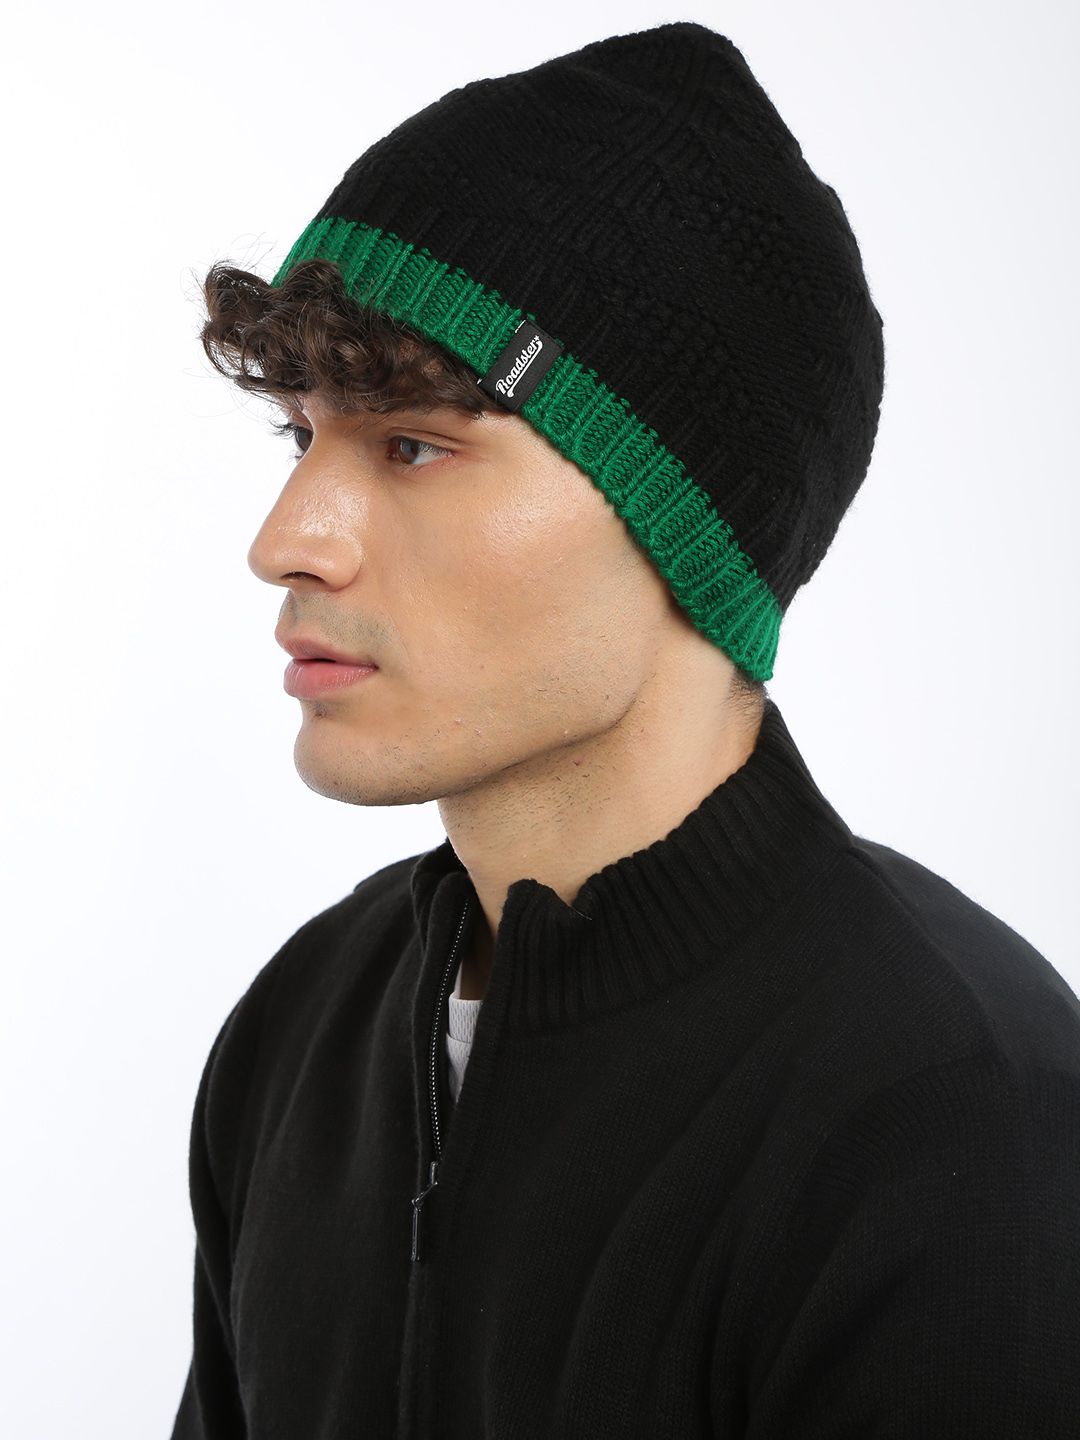 The Roadster Lifestyle Co Unisex Black & Green Colorblocked Beanie Price in India